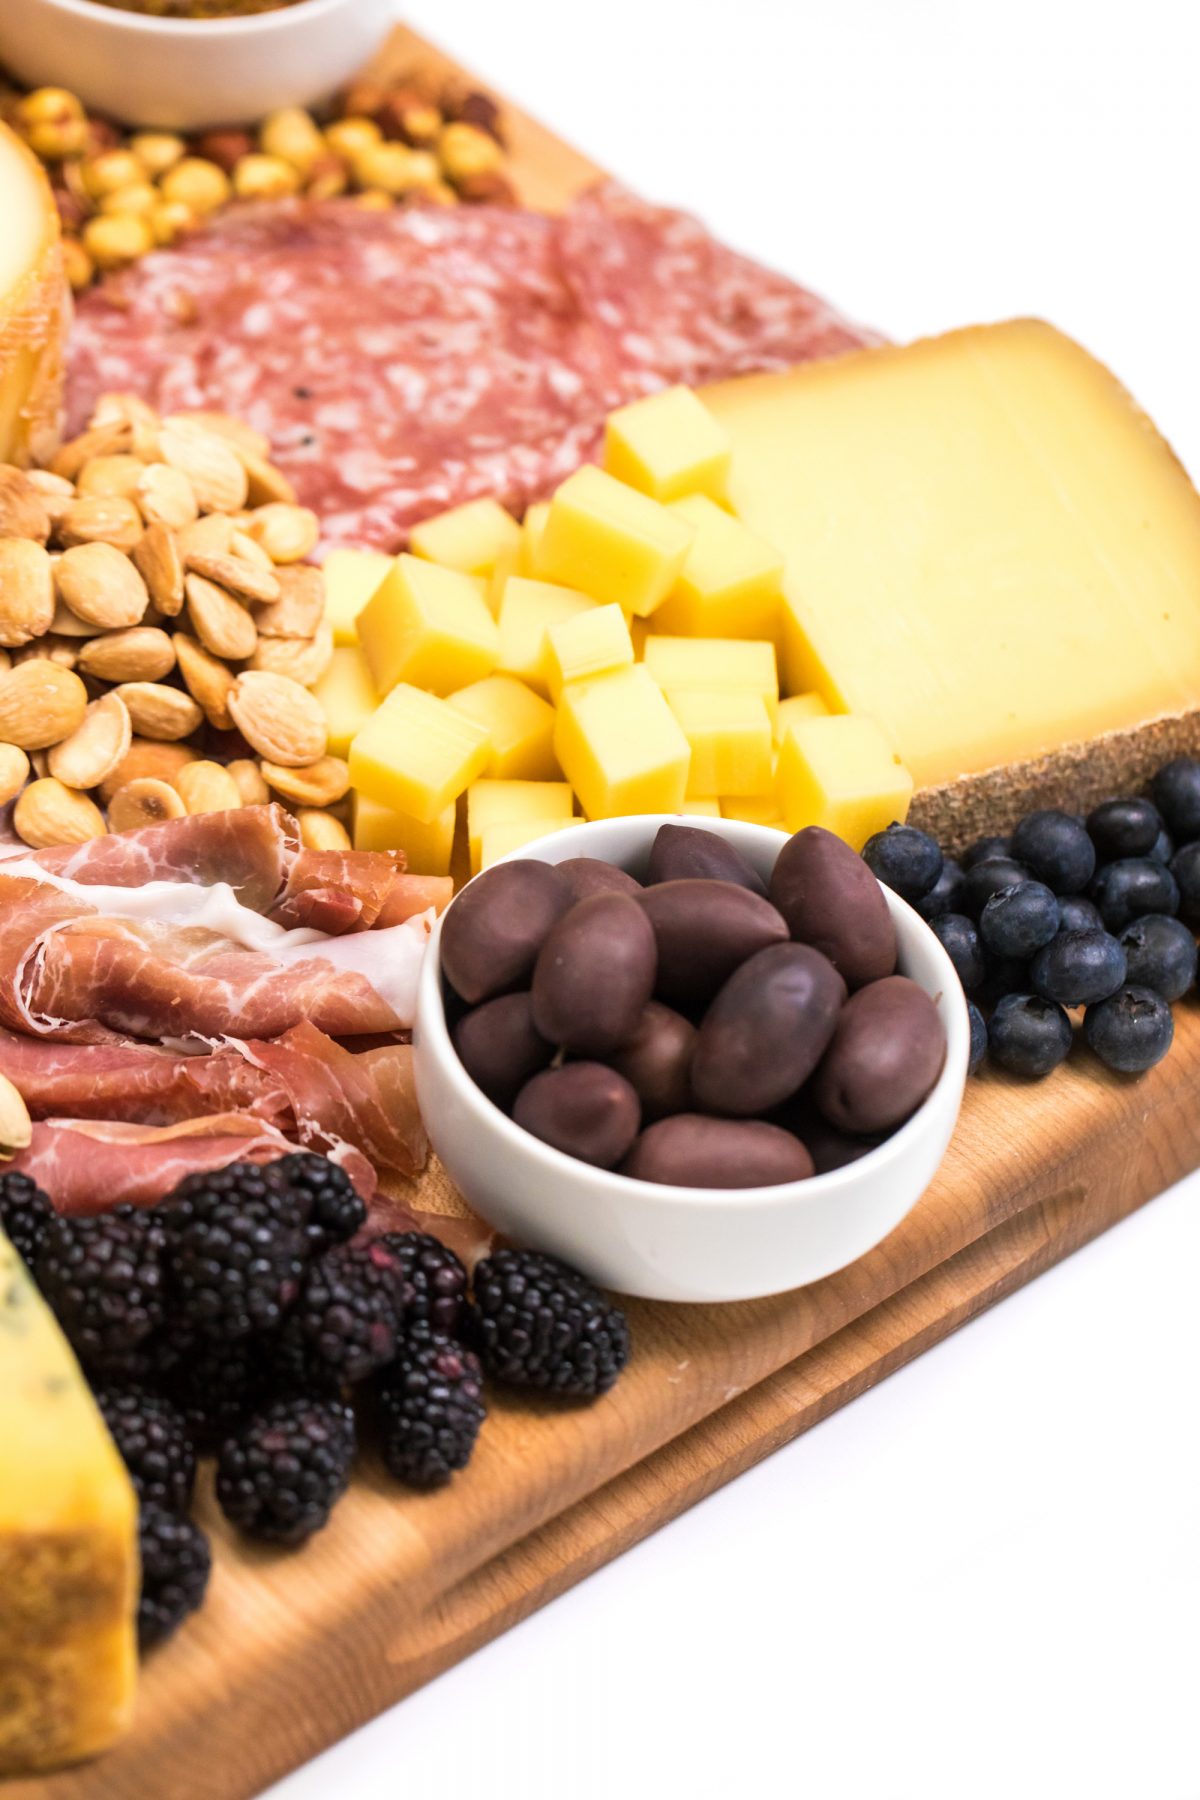 Charcuterie: The ultimate meat and cheese board